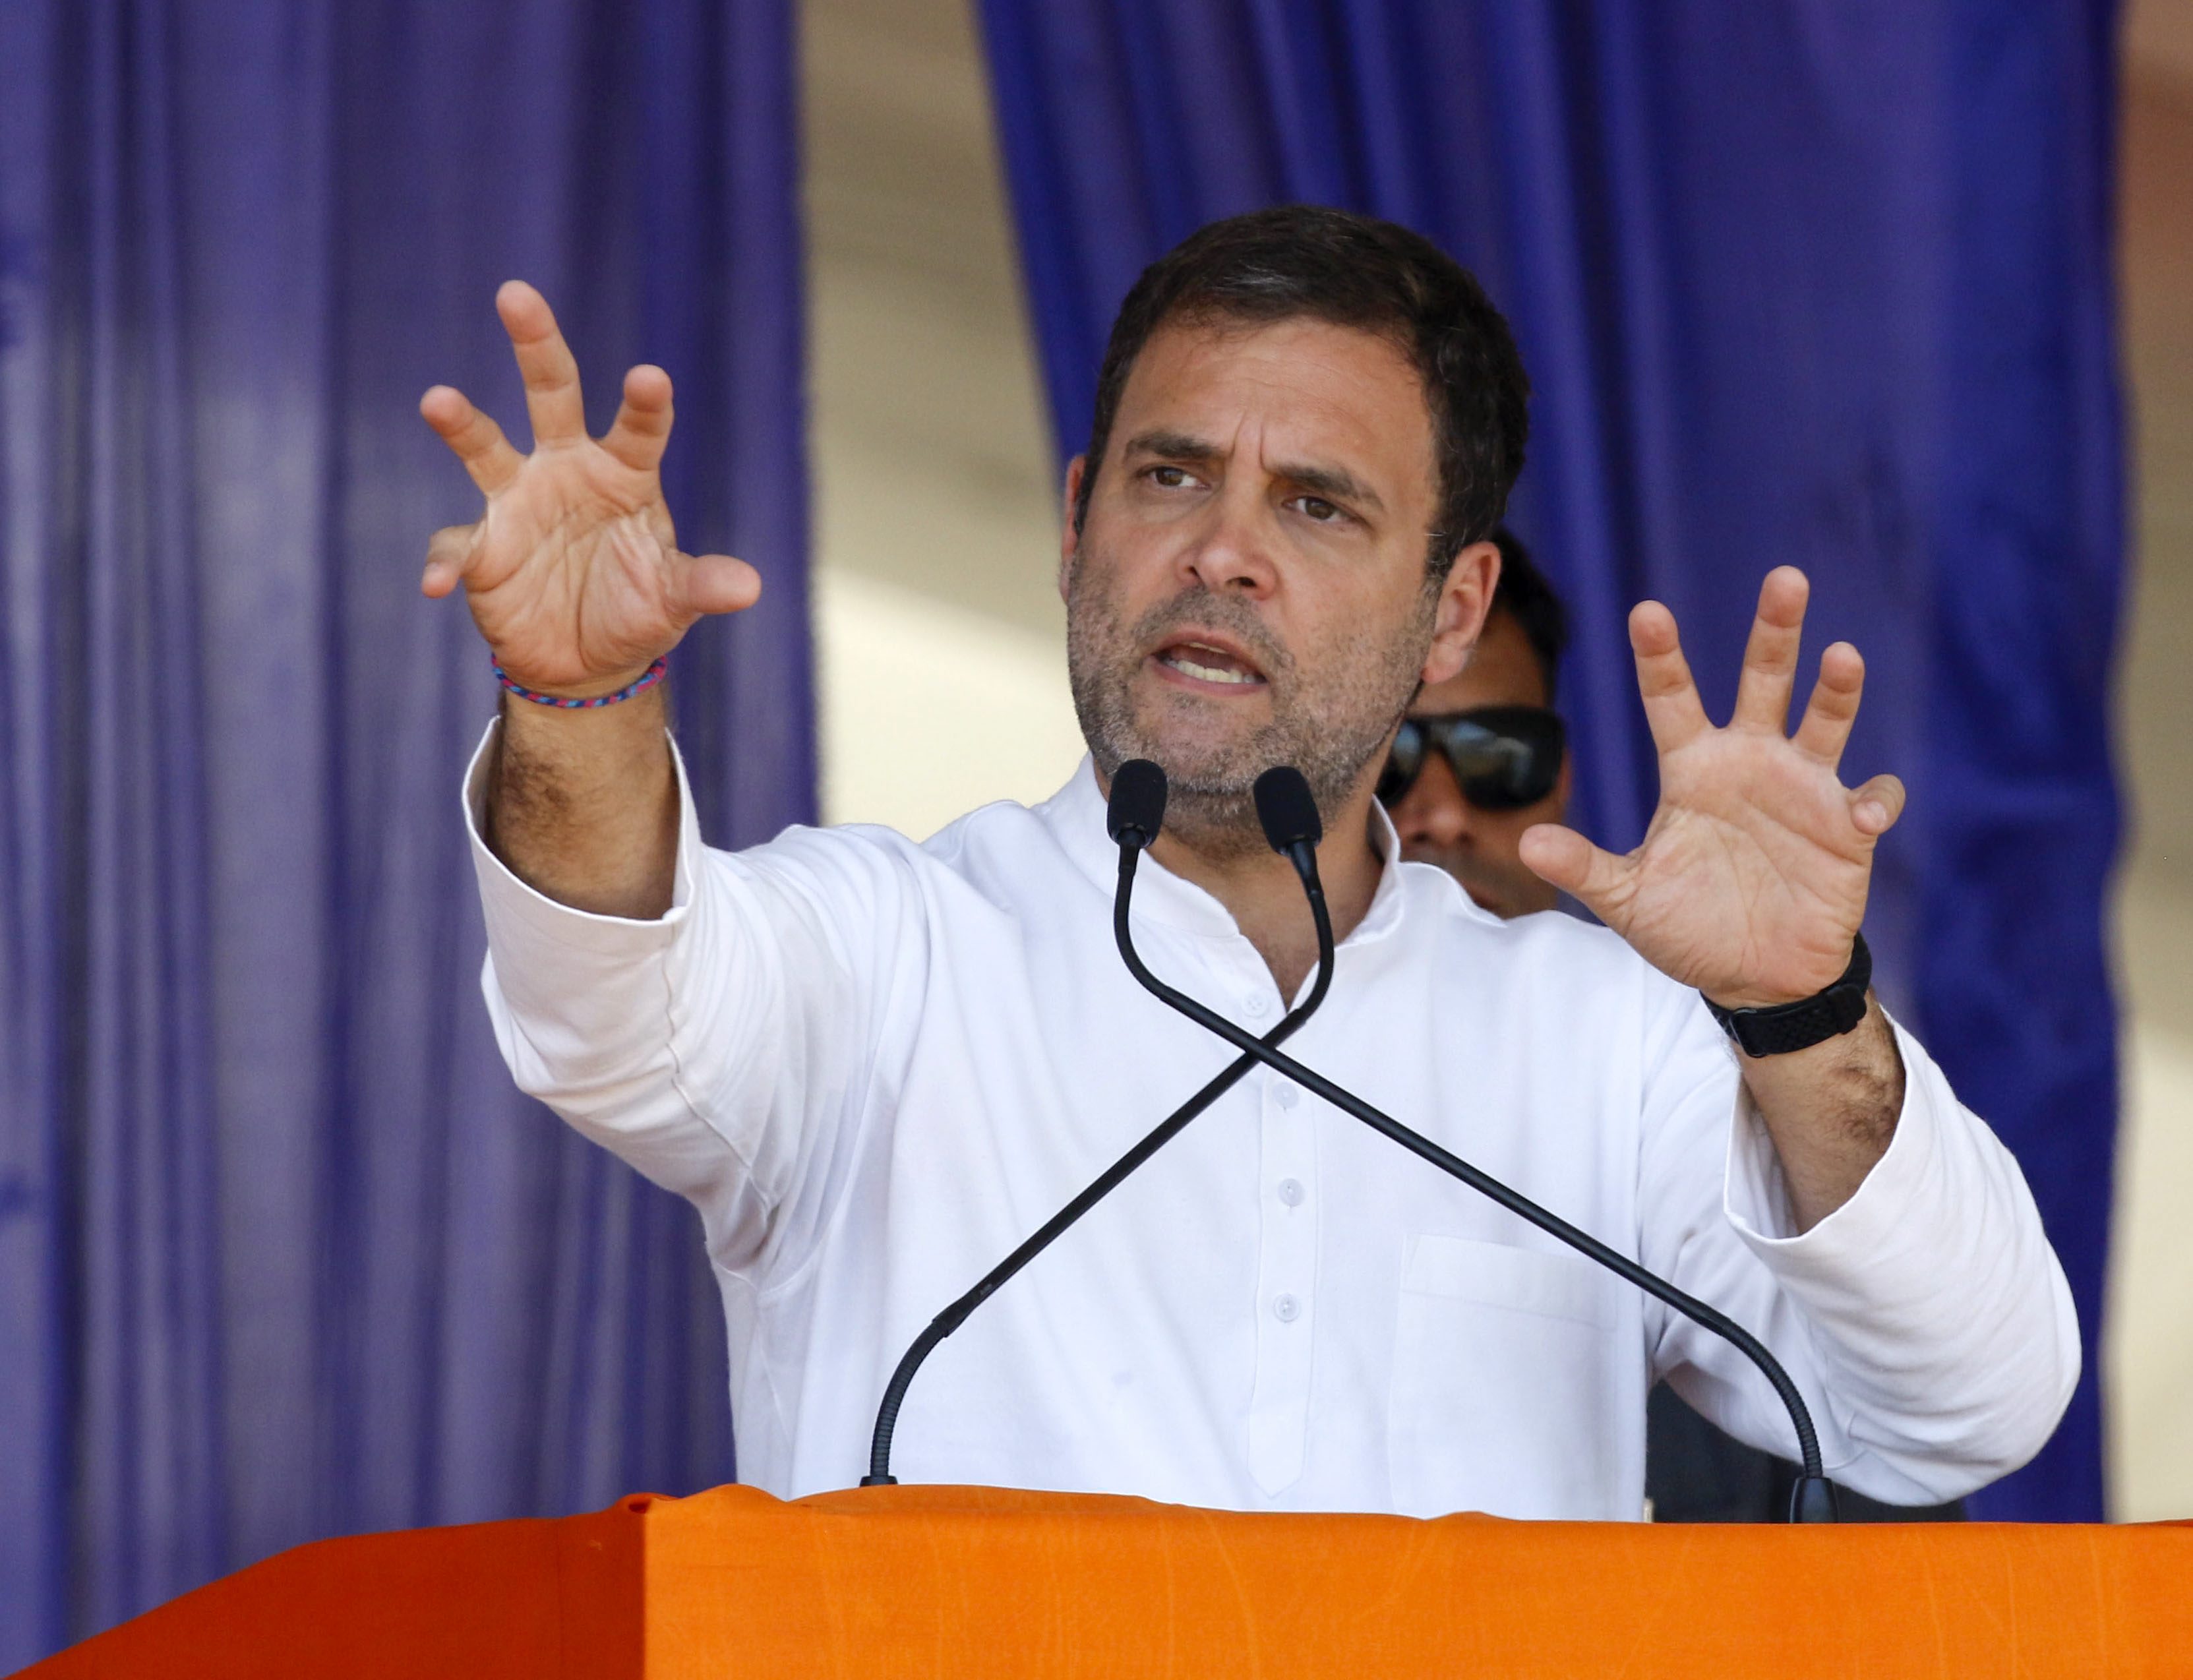 modi govt 'snatching away' reservation by 'blindly' implementing privatisation: rahul